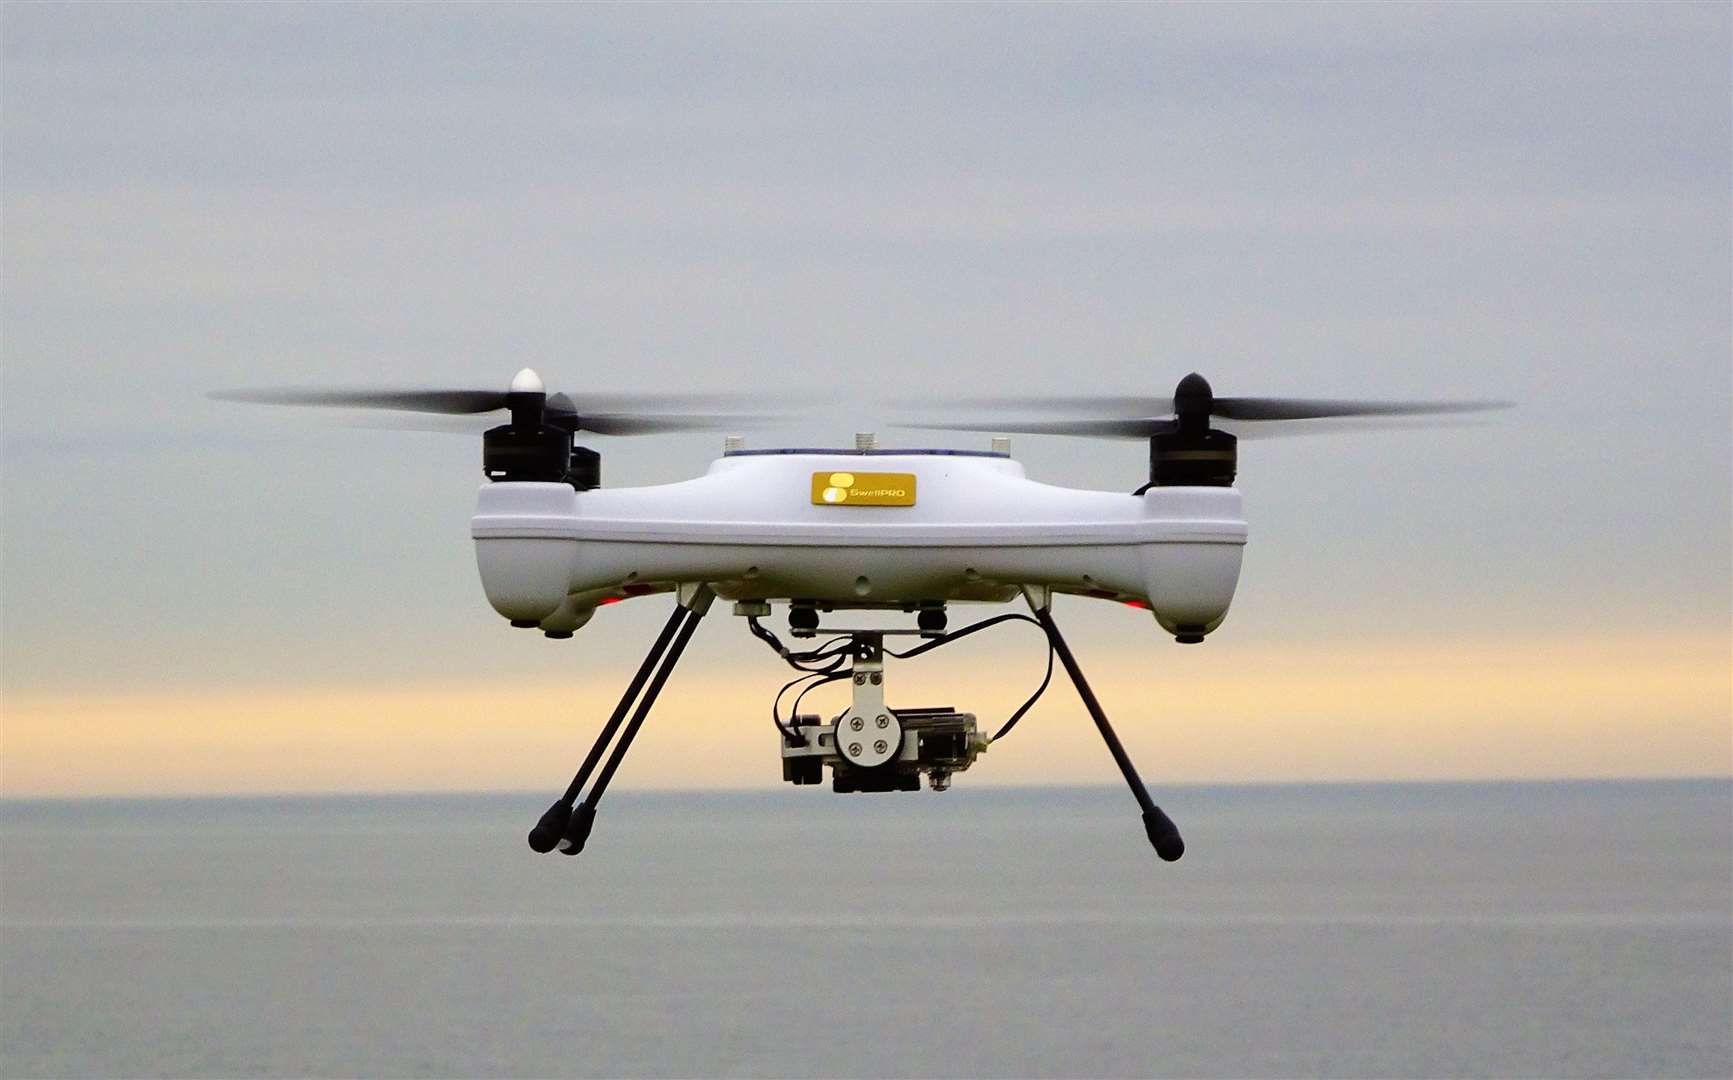 An example of the type of drone that the council is likely to have purchased.